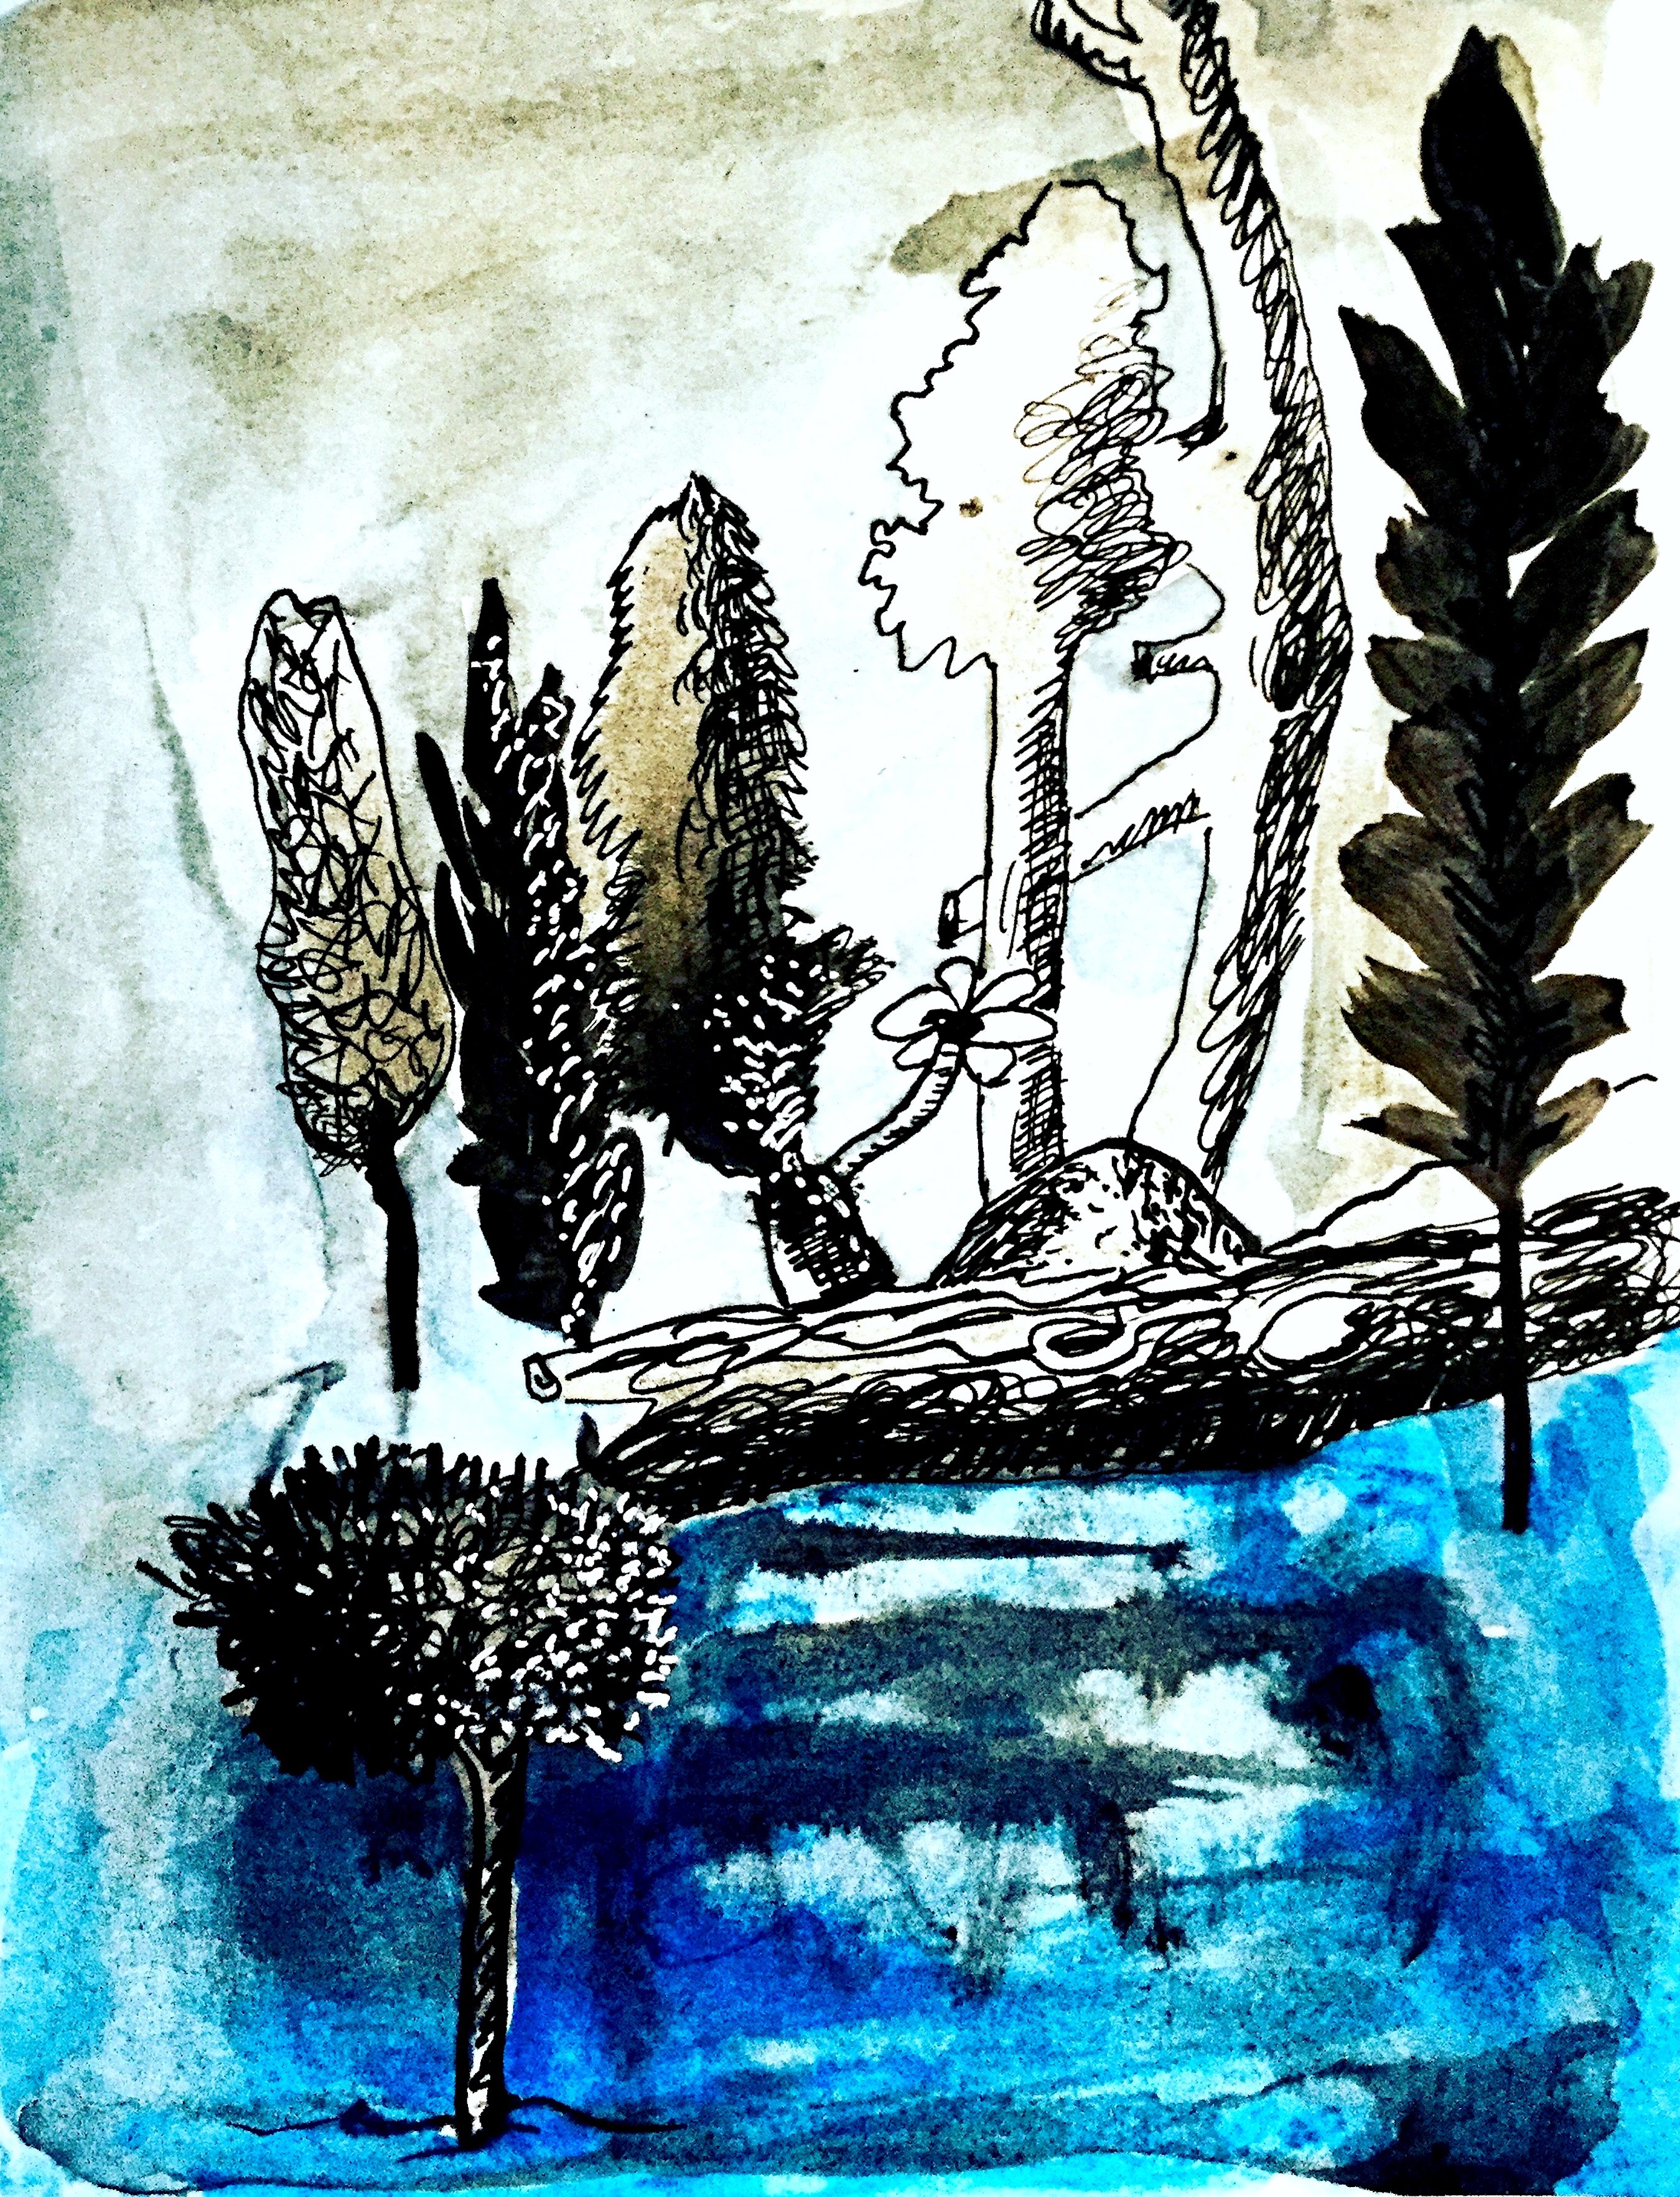 pen and ink and watercolor of trees and logs by a lake